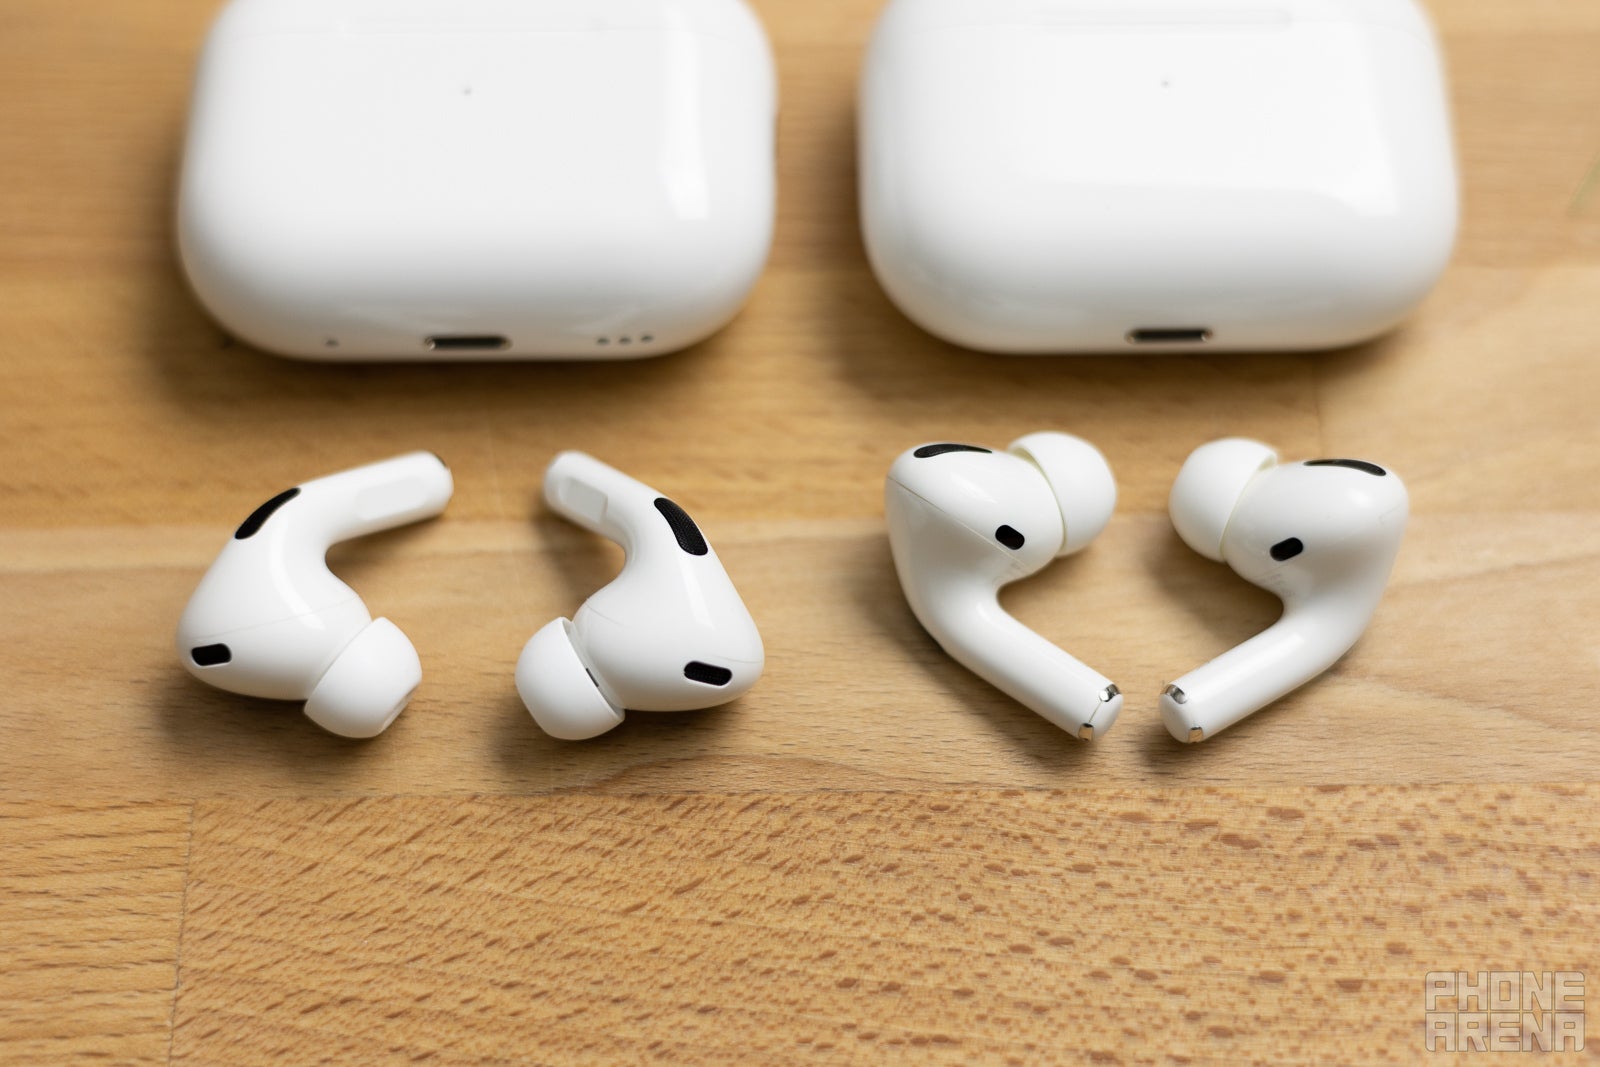 Apple AirPods Pro (1st generation) - full specs, details and review